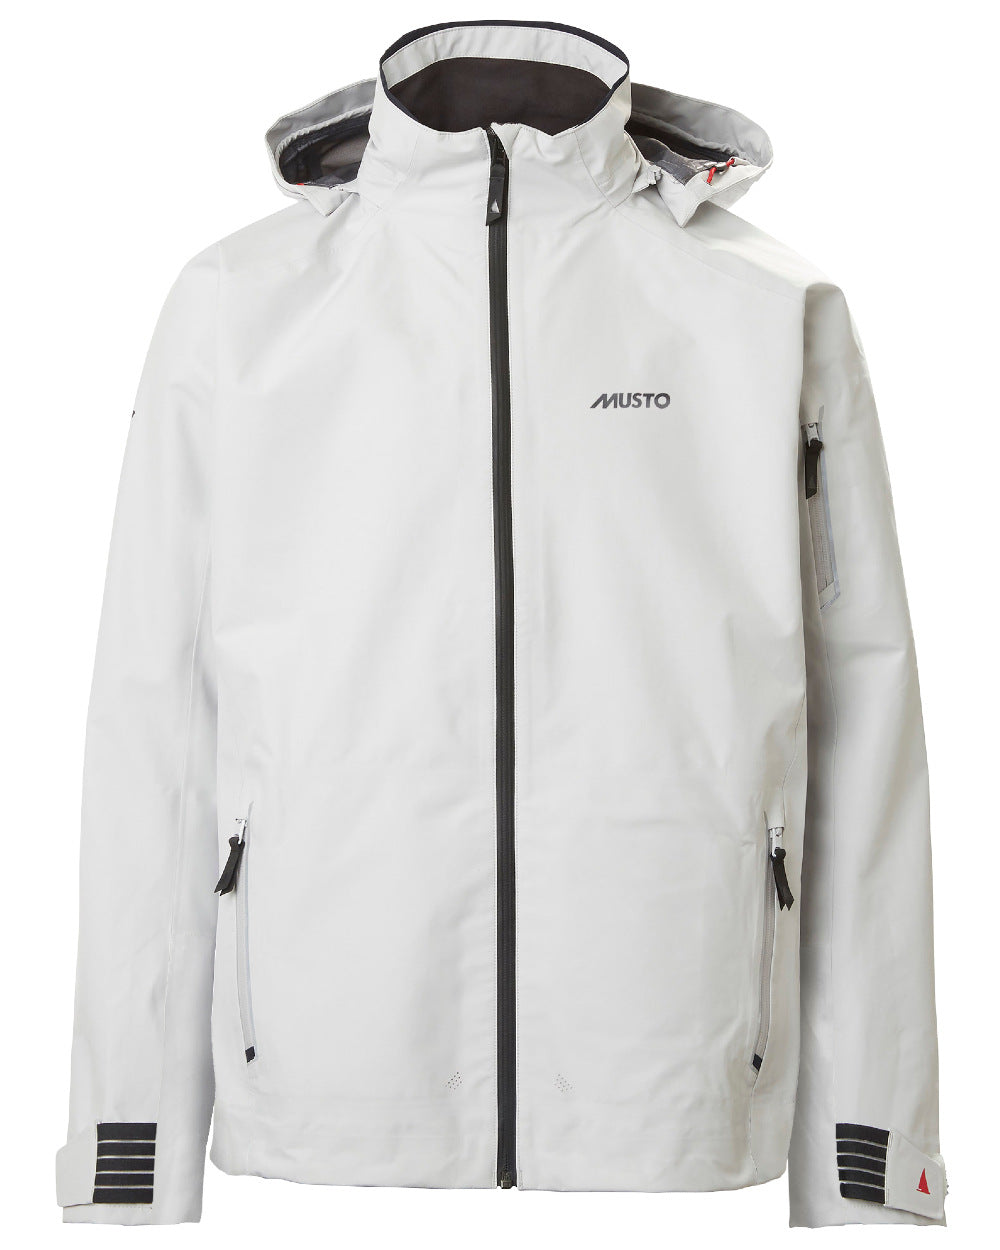 Platinum Coloured Musto LPX Gore-Tex Jacket On A White Background 